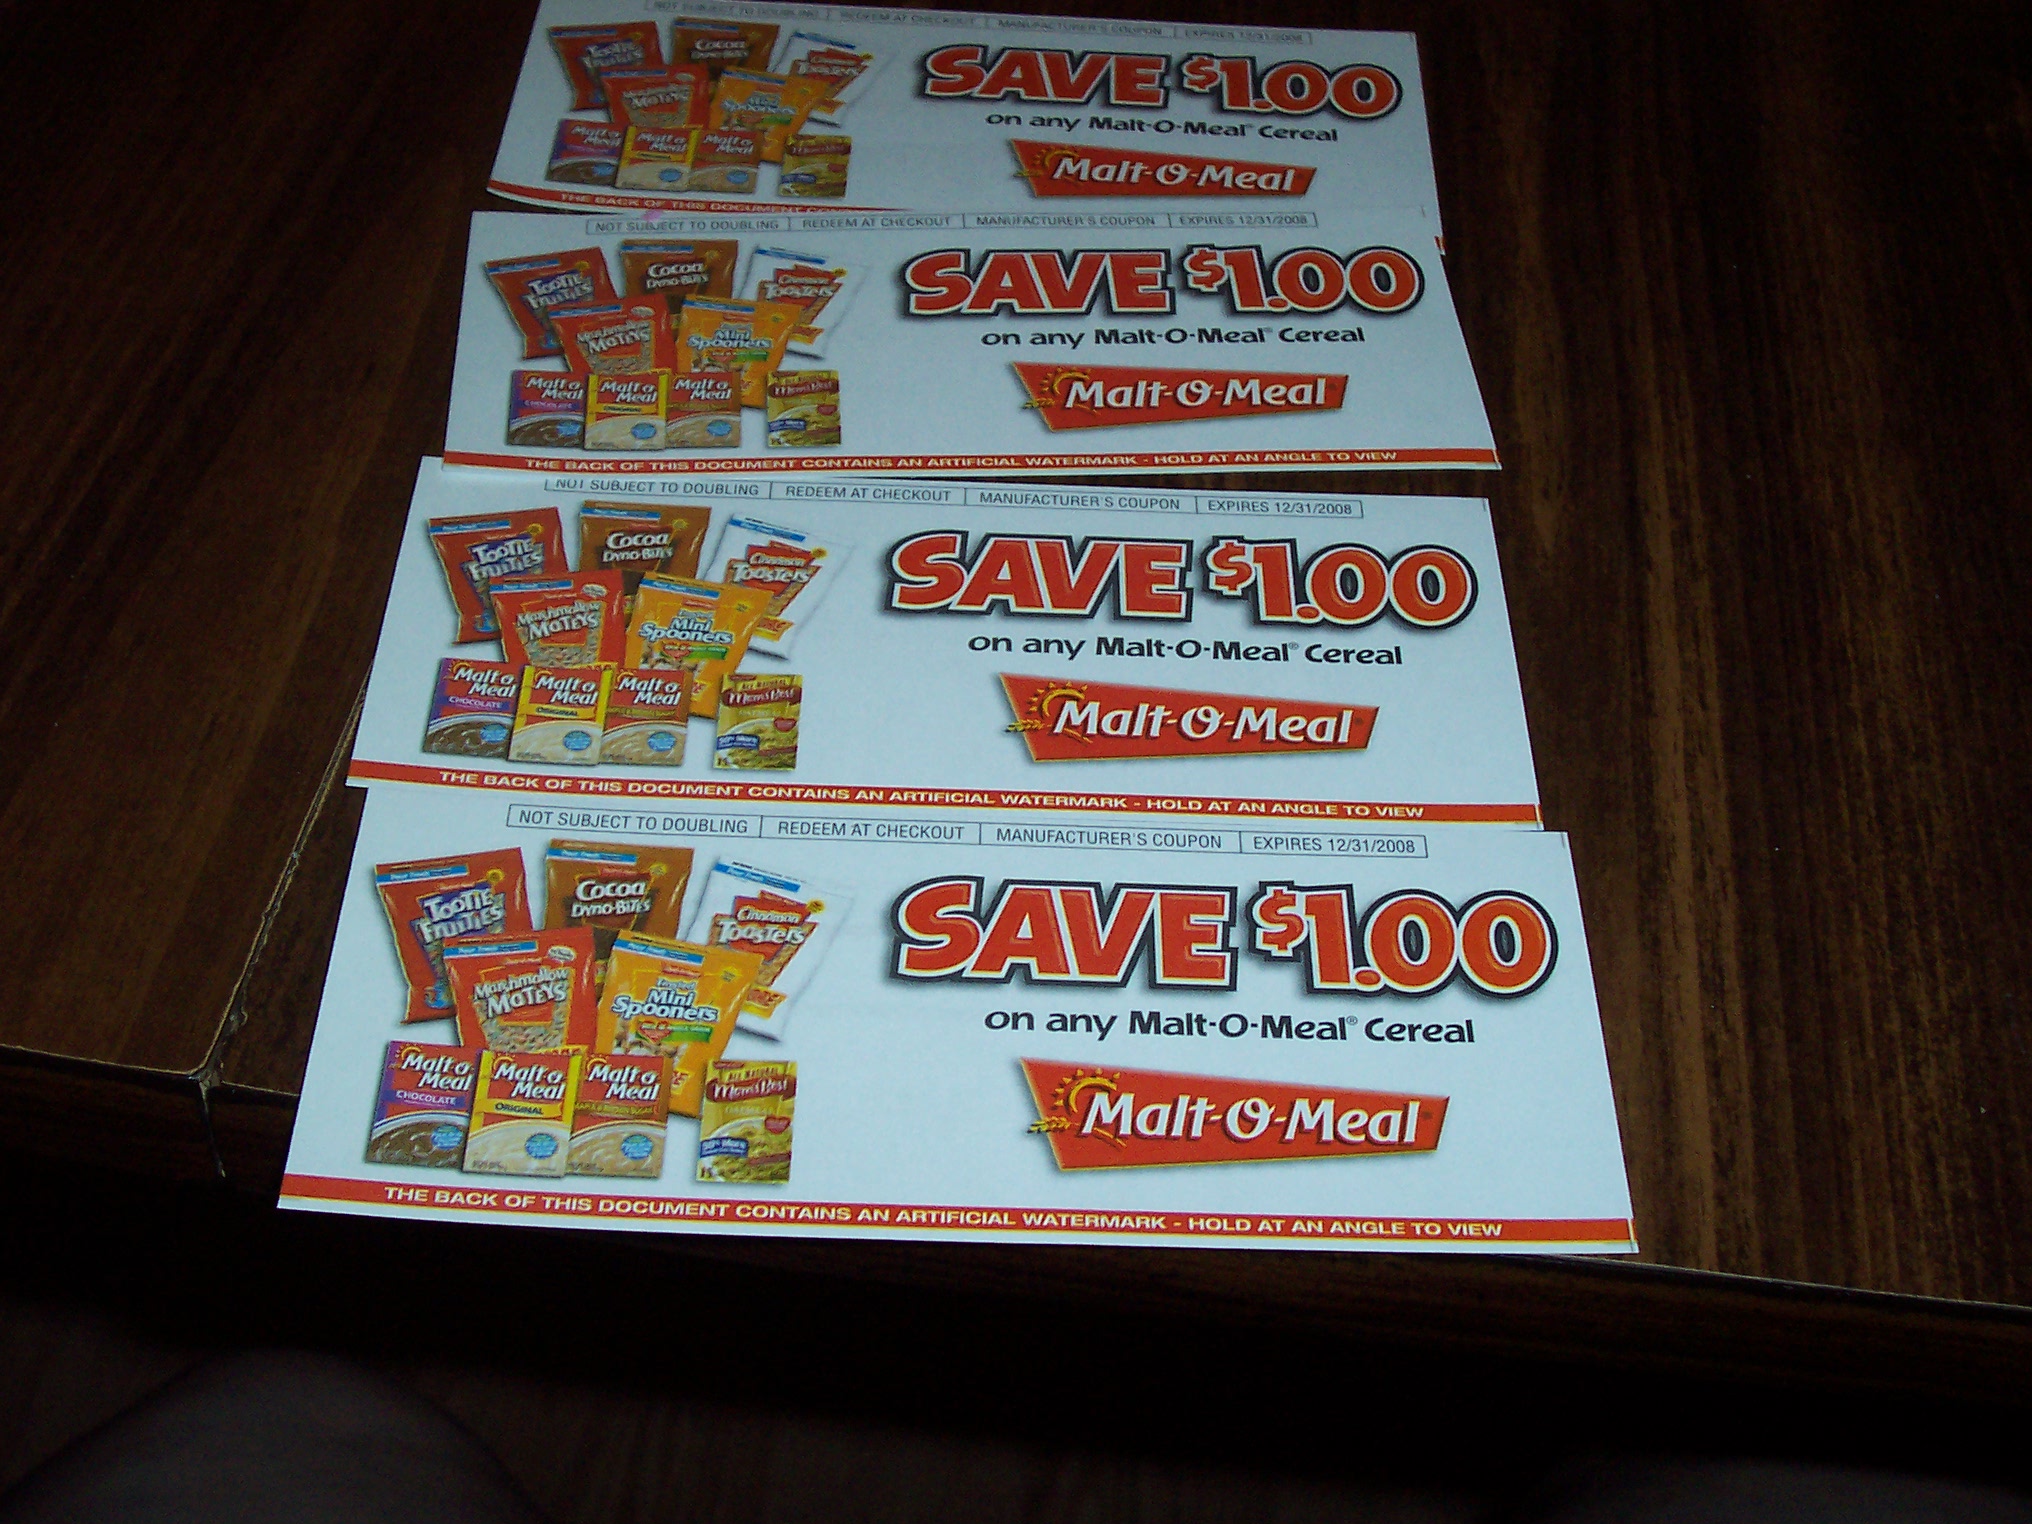 malt-o-meal-coupons-by-request